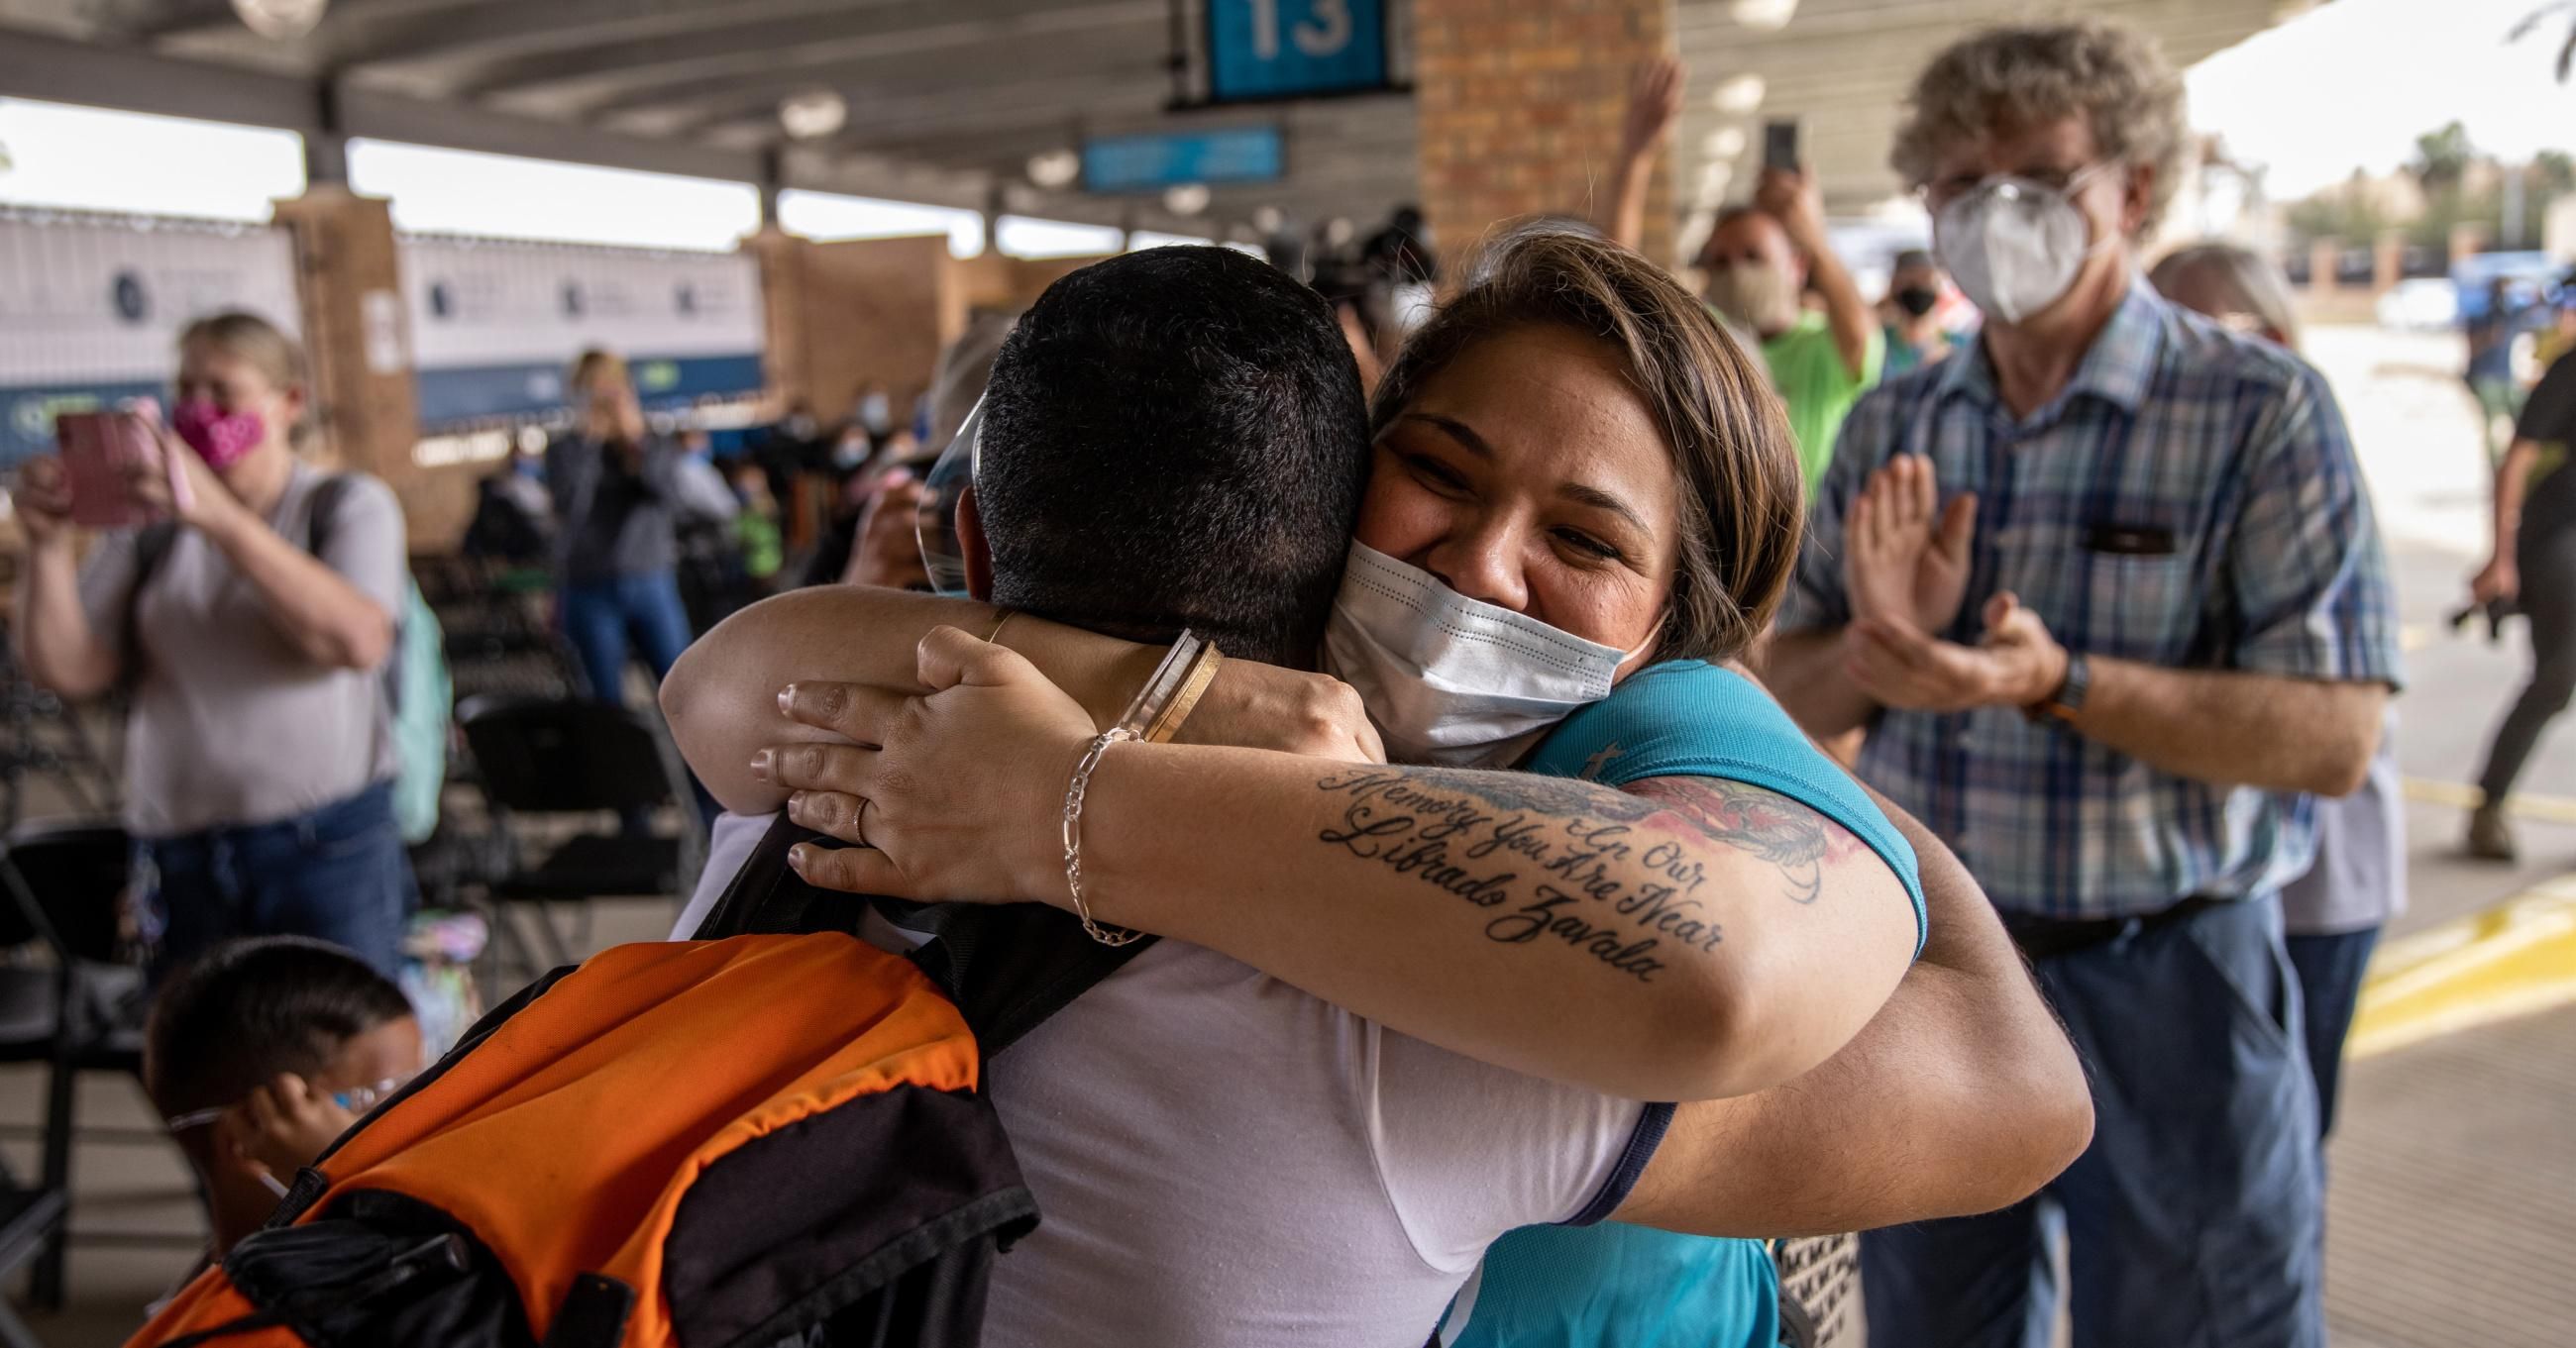 A volunteer welcomes members of a group of 25 asylum-seekers allowed into the United States on February 25, 2021 in Brownsville, Texas. (Photo: John Moore/Getty Images) 